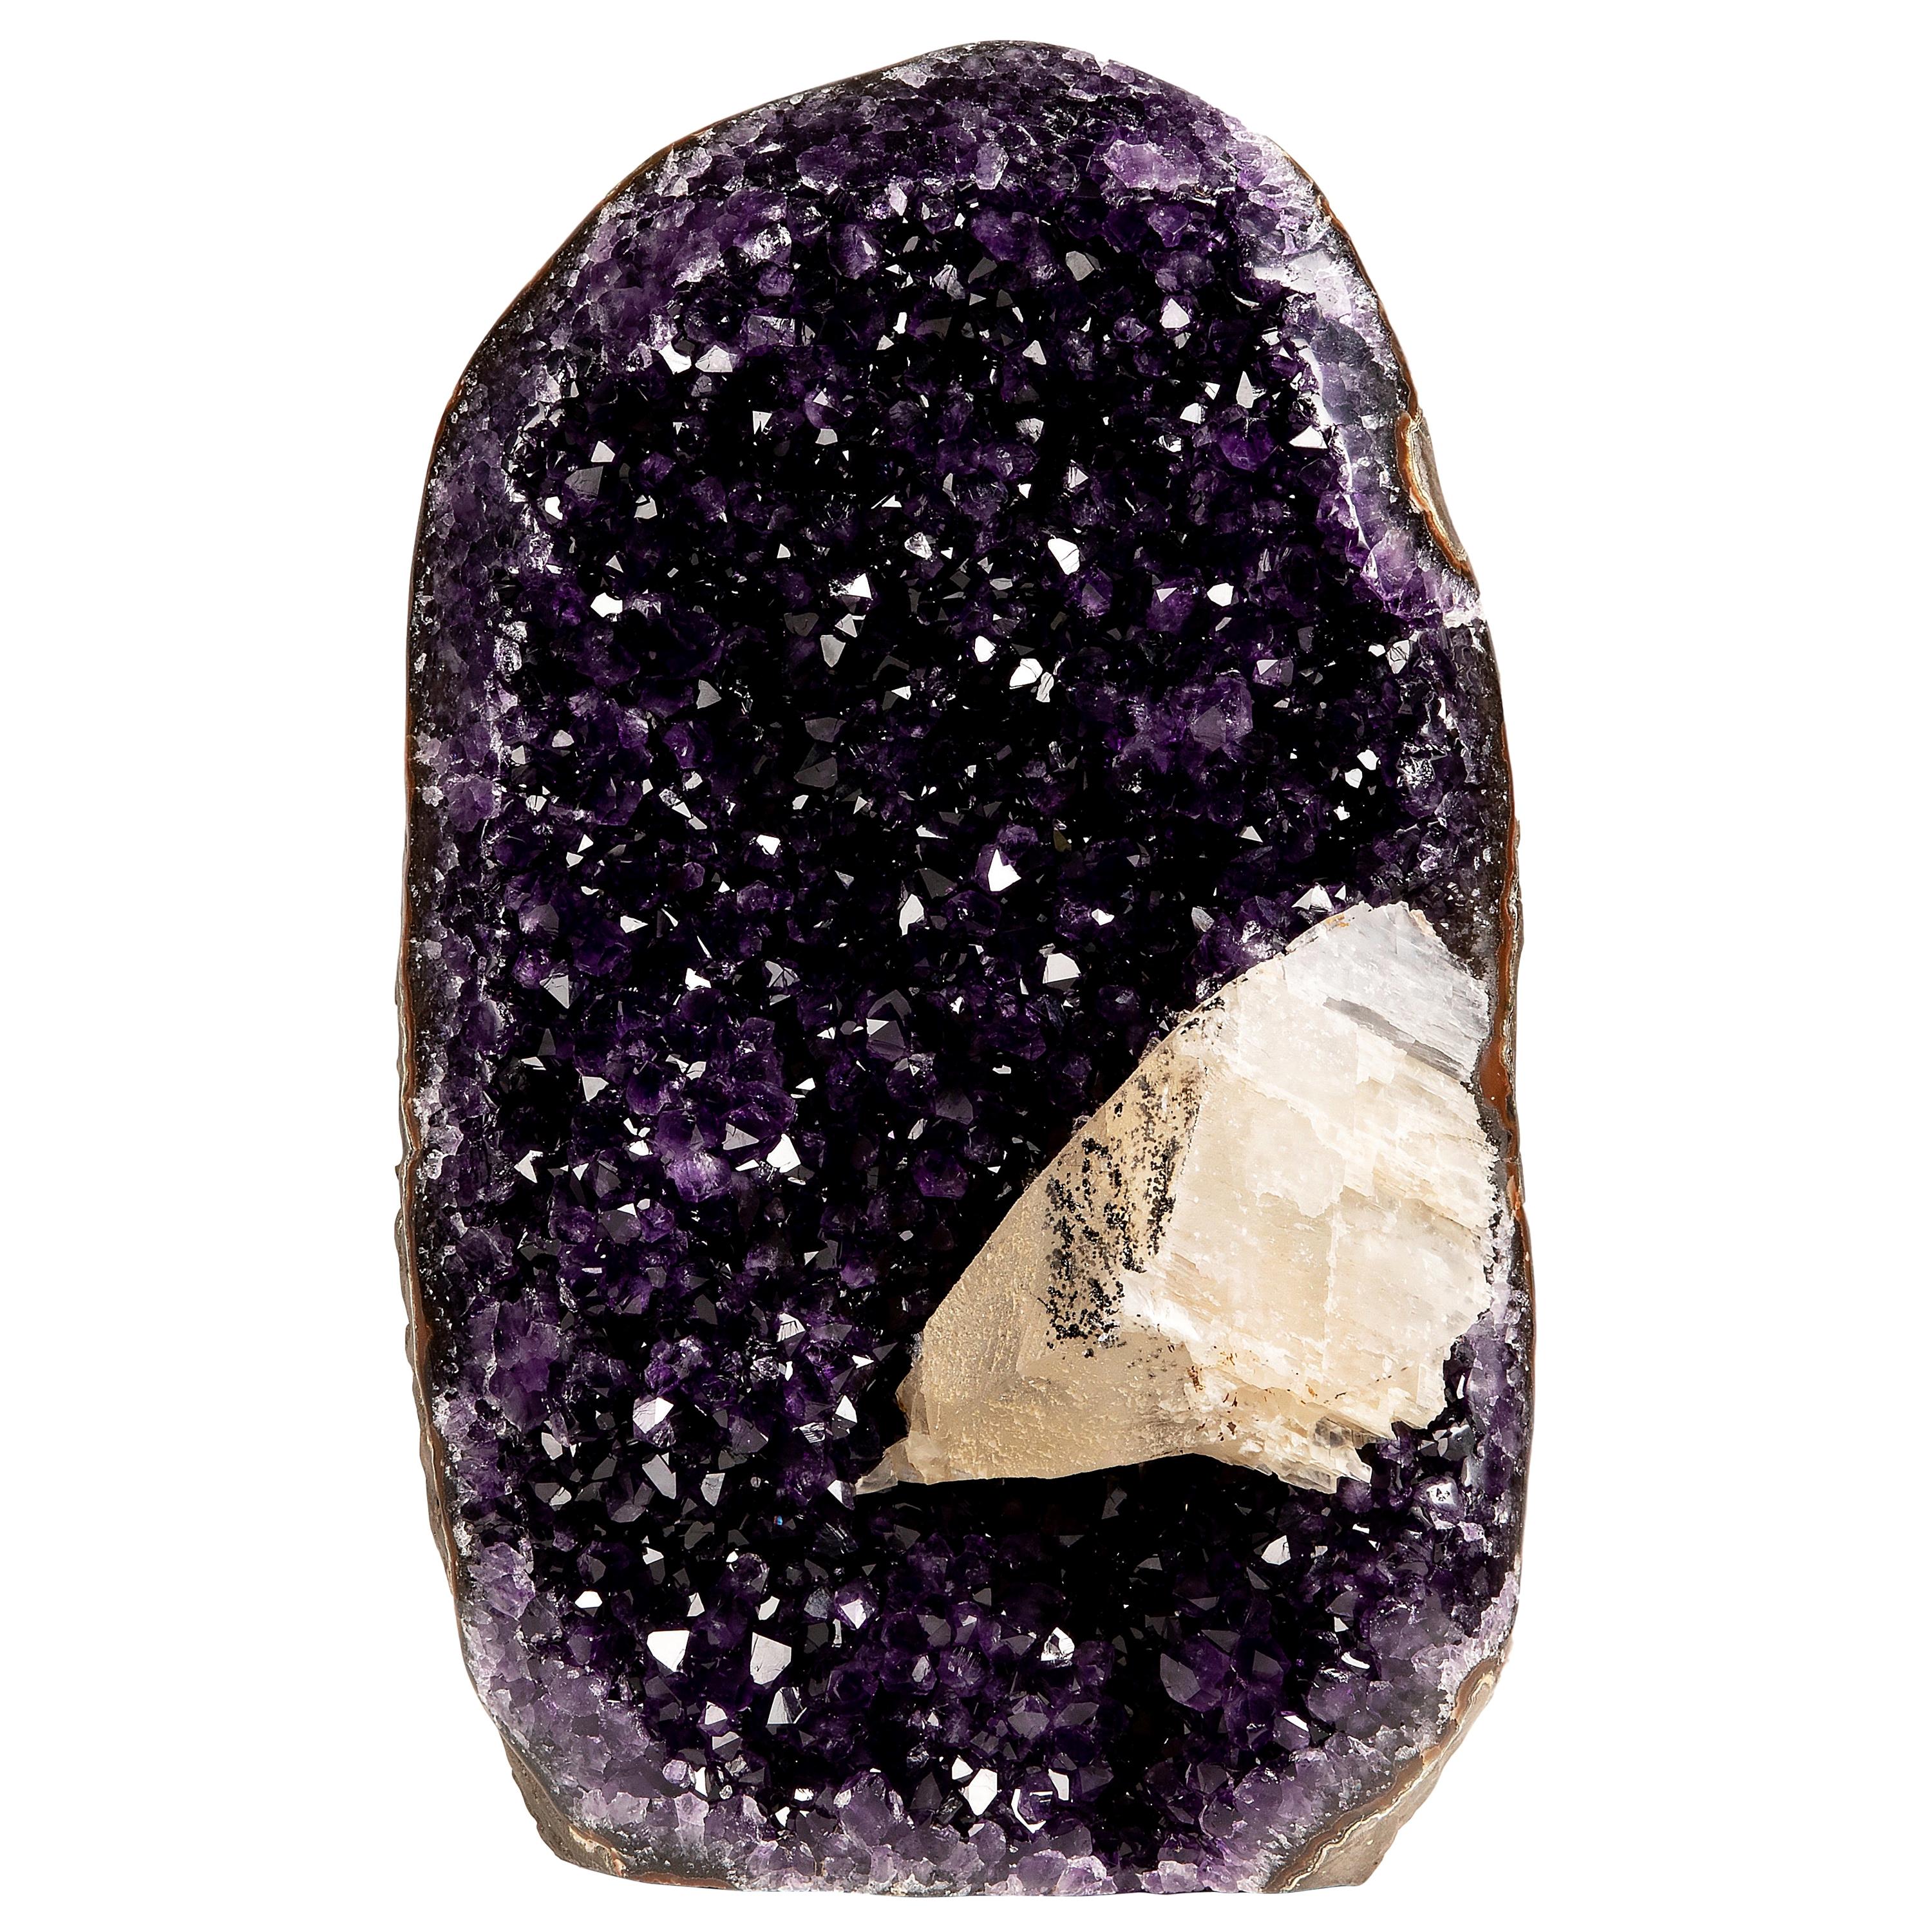 High Quality Deep Purple Amethyst with Calcite Surrounded by Quartz and Hematite